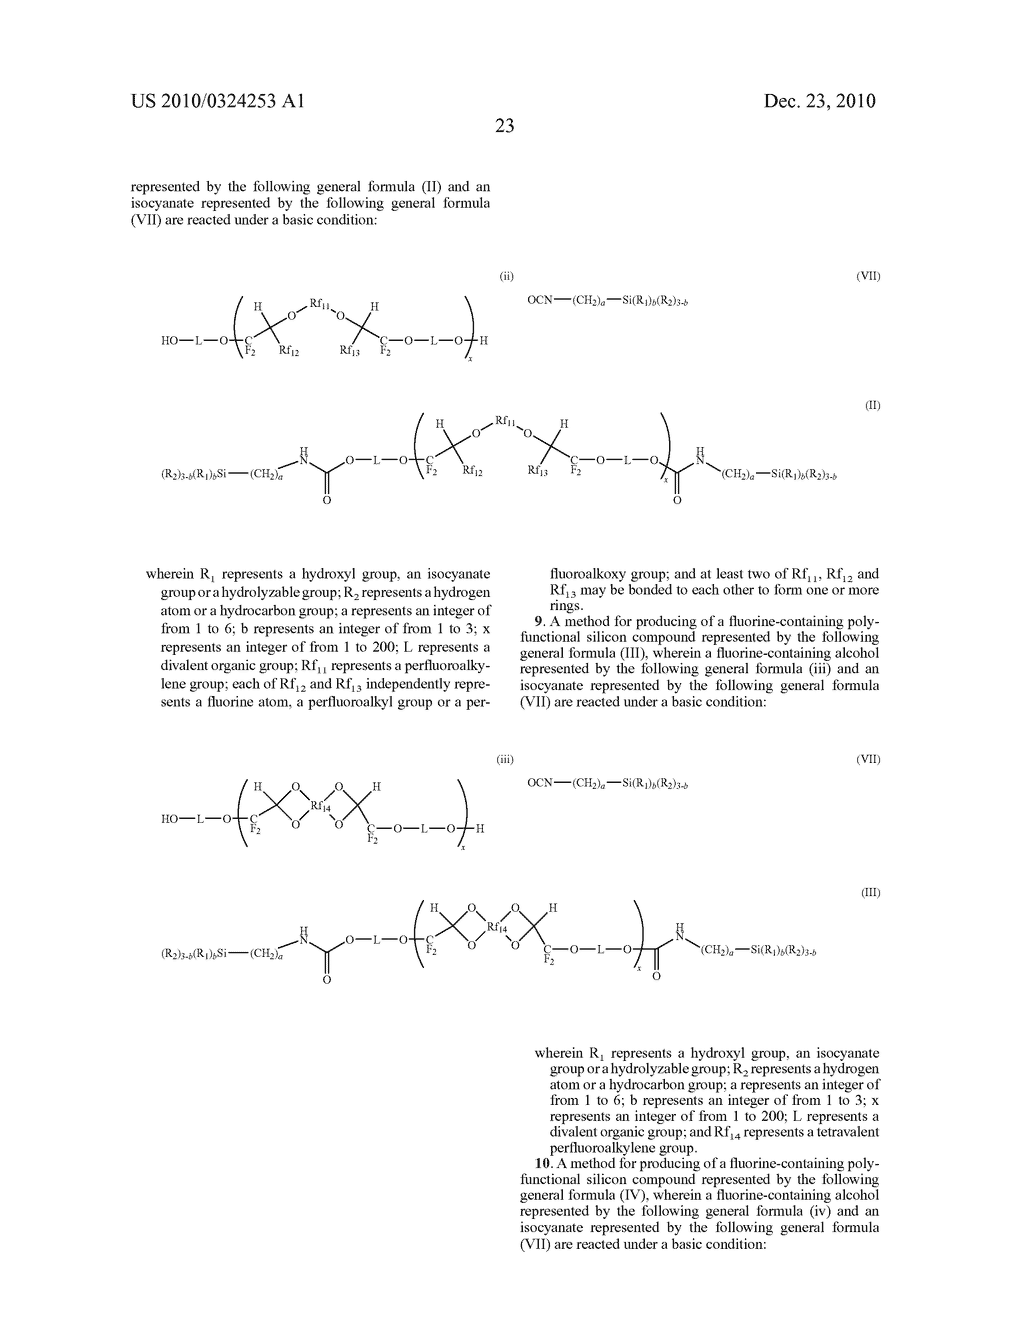 FLUORINE-CONTAINING POLYFUNCTIONAL SILICON COMPOUND AND METHOD FOR PRODUCING FLUORINE-CONTAINING POLYFUNCTIONAL SILICON COMPOUND - diagram, schematic, and image 24